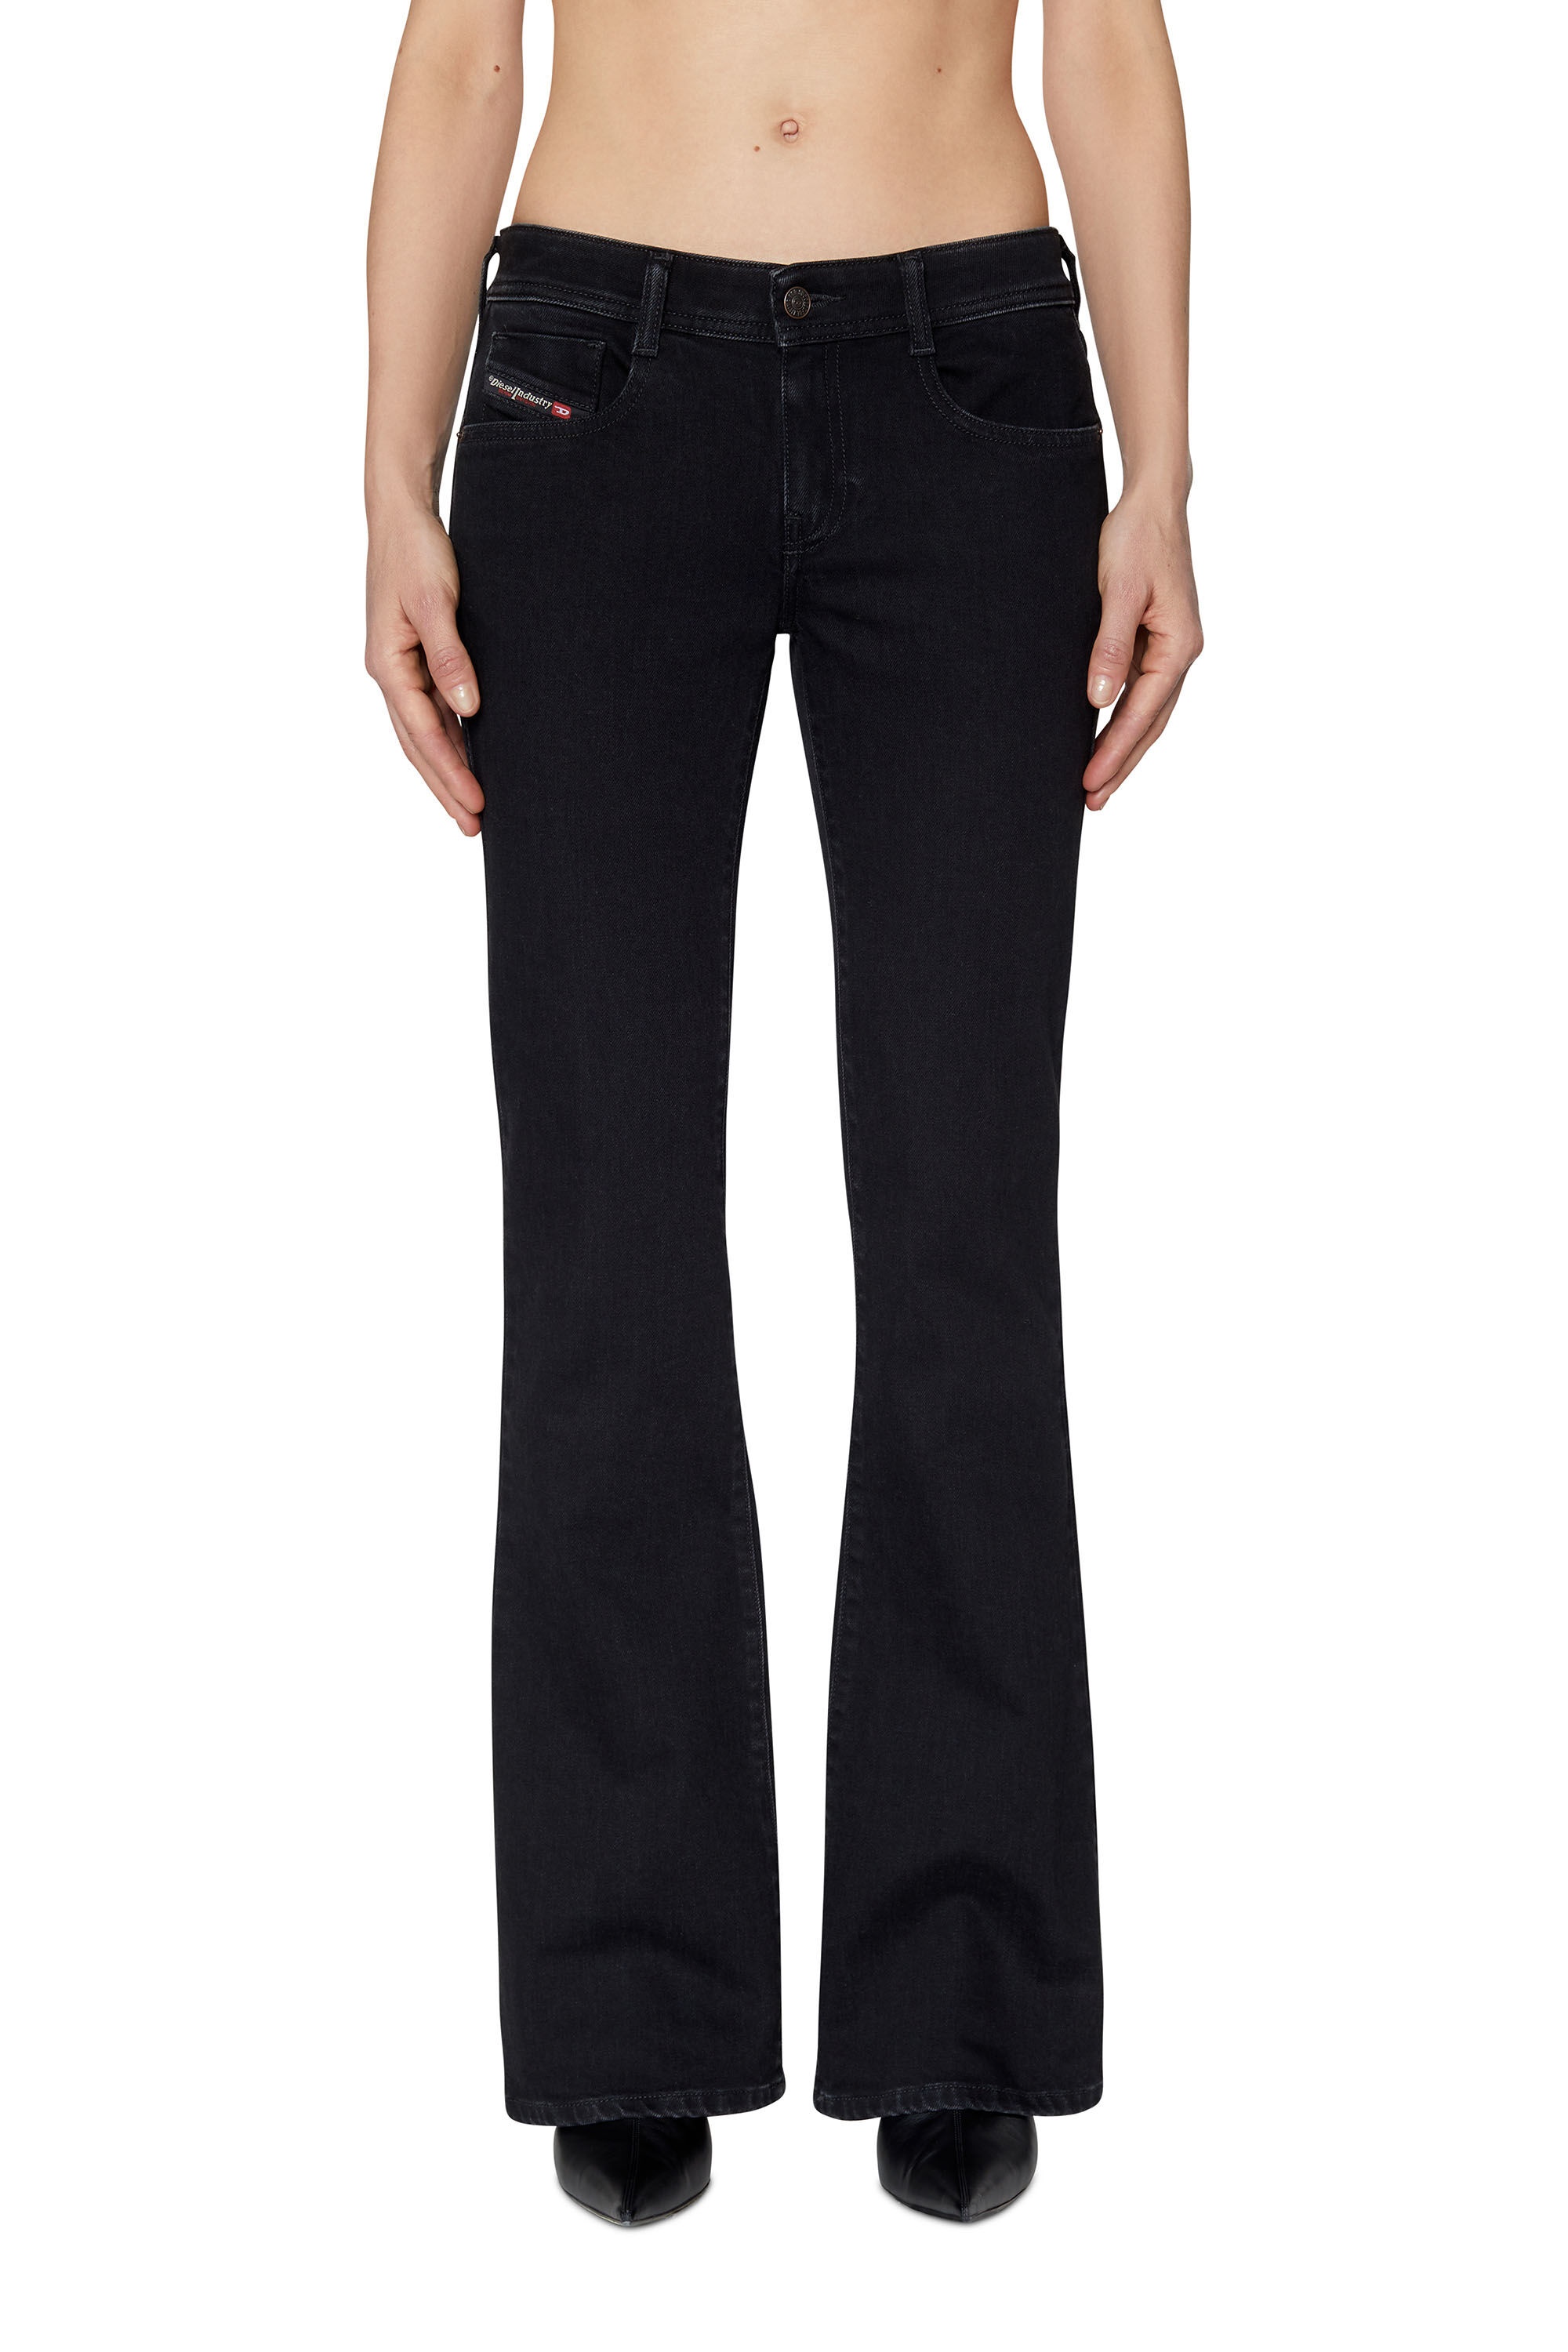 BOOTCUT AND FLARE JEANS 1969 D-EBBEY Z9C25 - 3